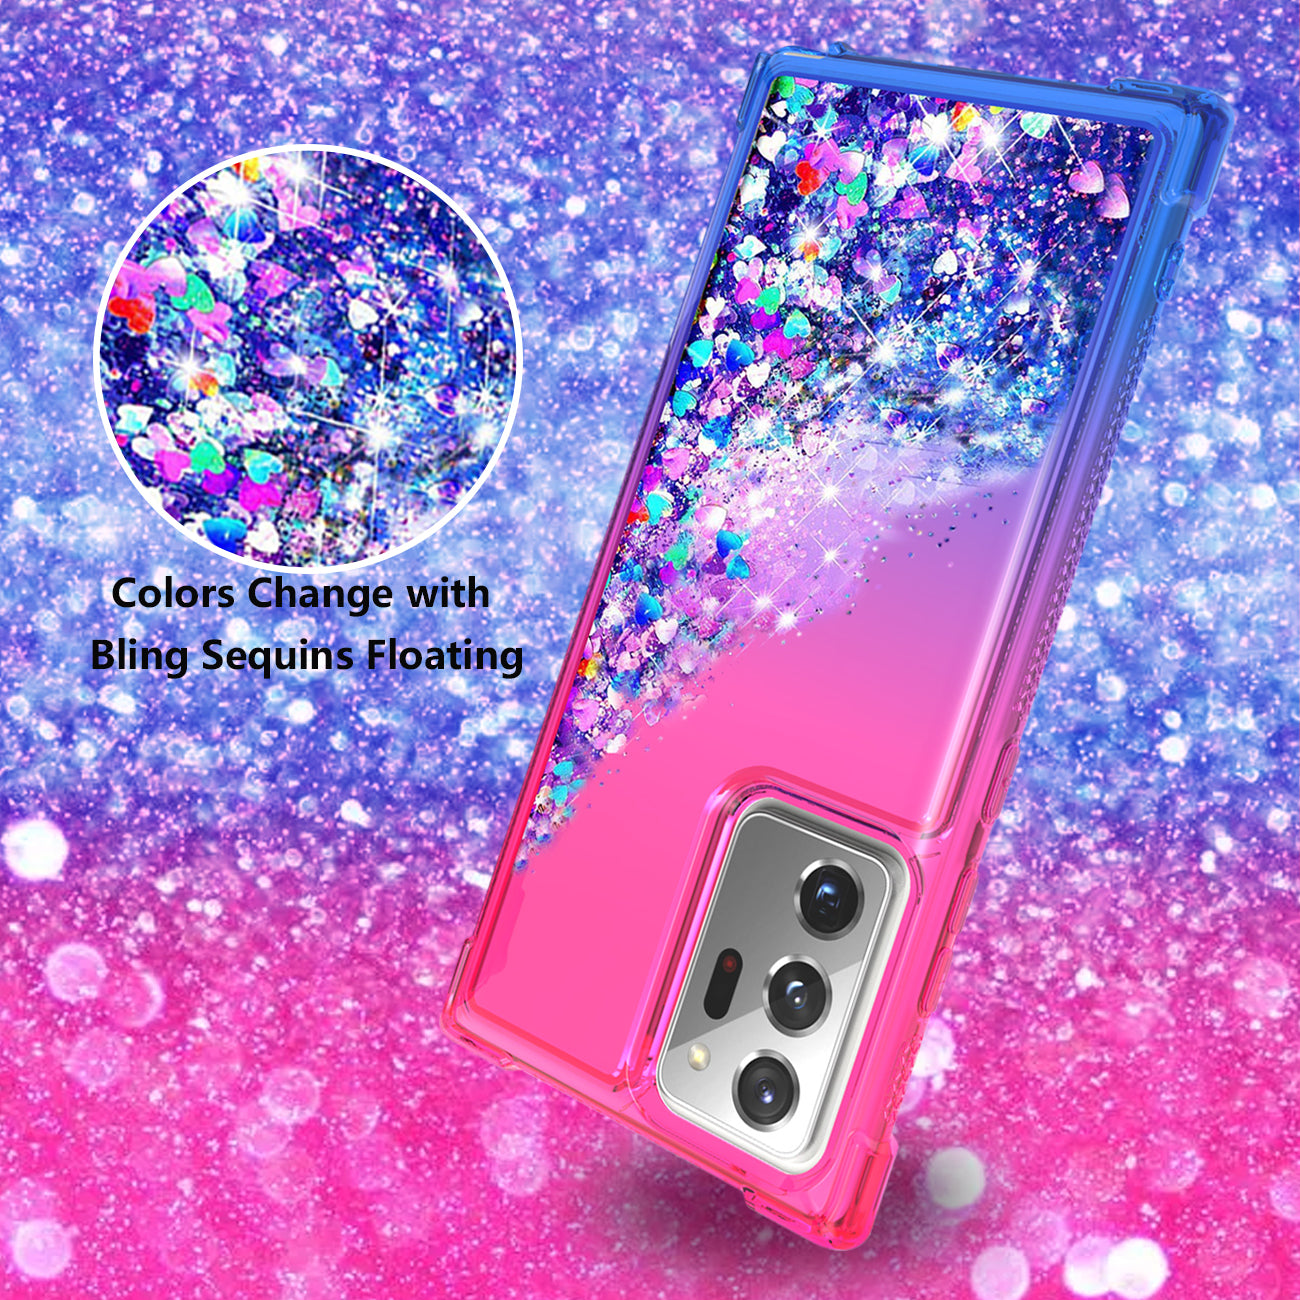 Shiny Flowing Glitter Liquid Bumper Case For SAMSUNG GALAXY NOTE 20 ULTRA In Pink